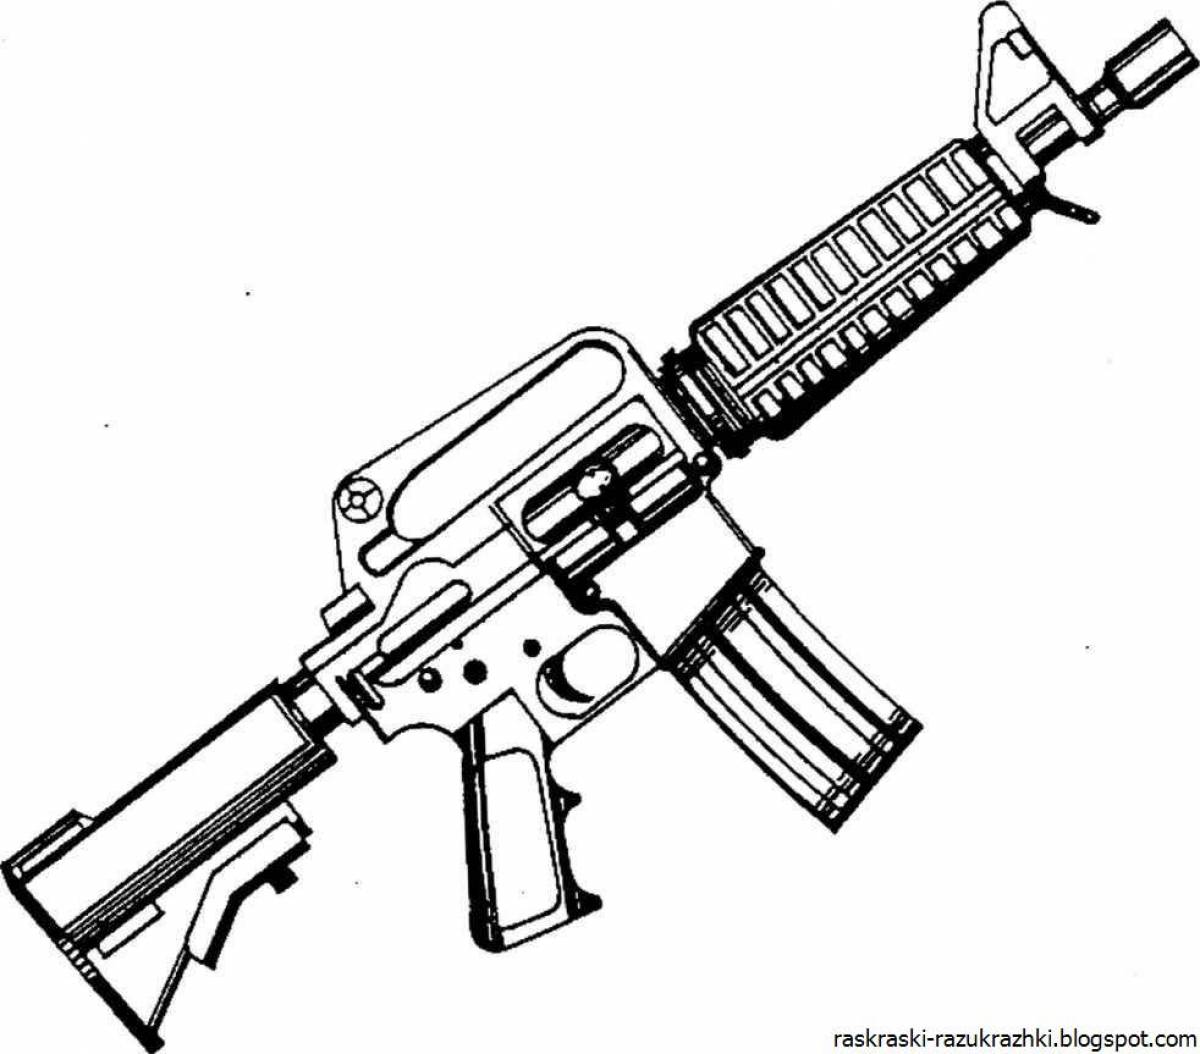 Complex weapon coloring page